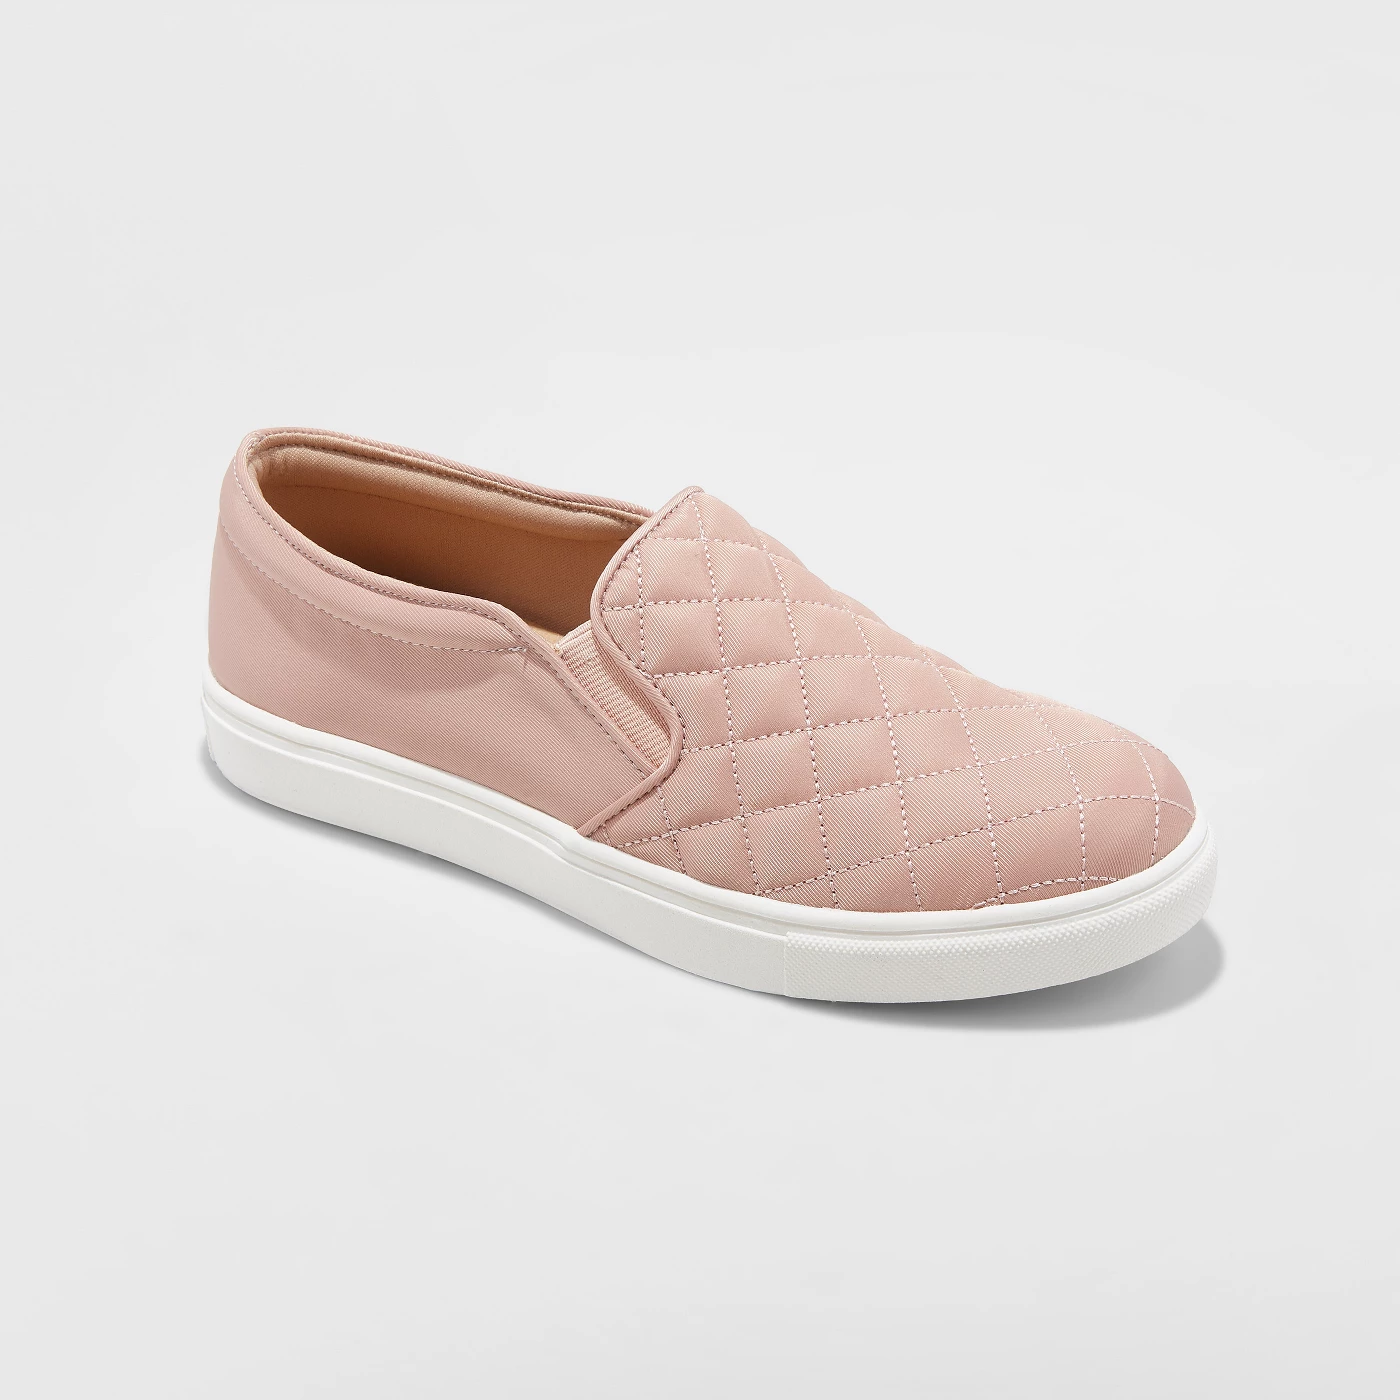 Women's Reese Quilted Sneakers - A New Dayâ¢ - image 1 of 3